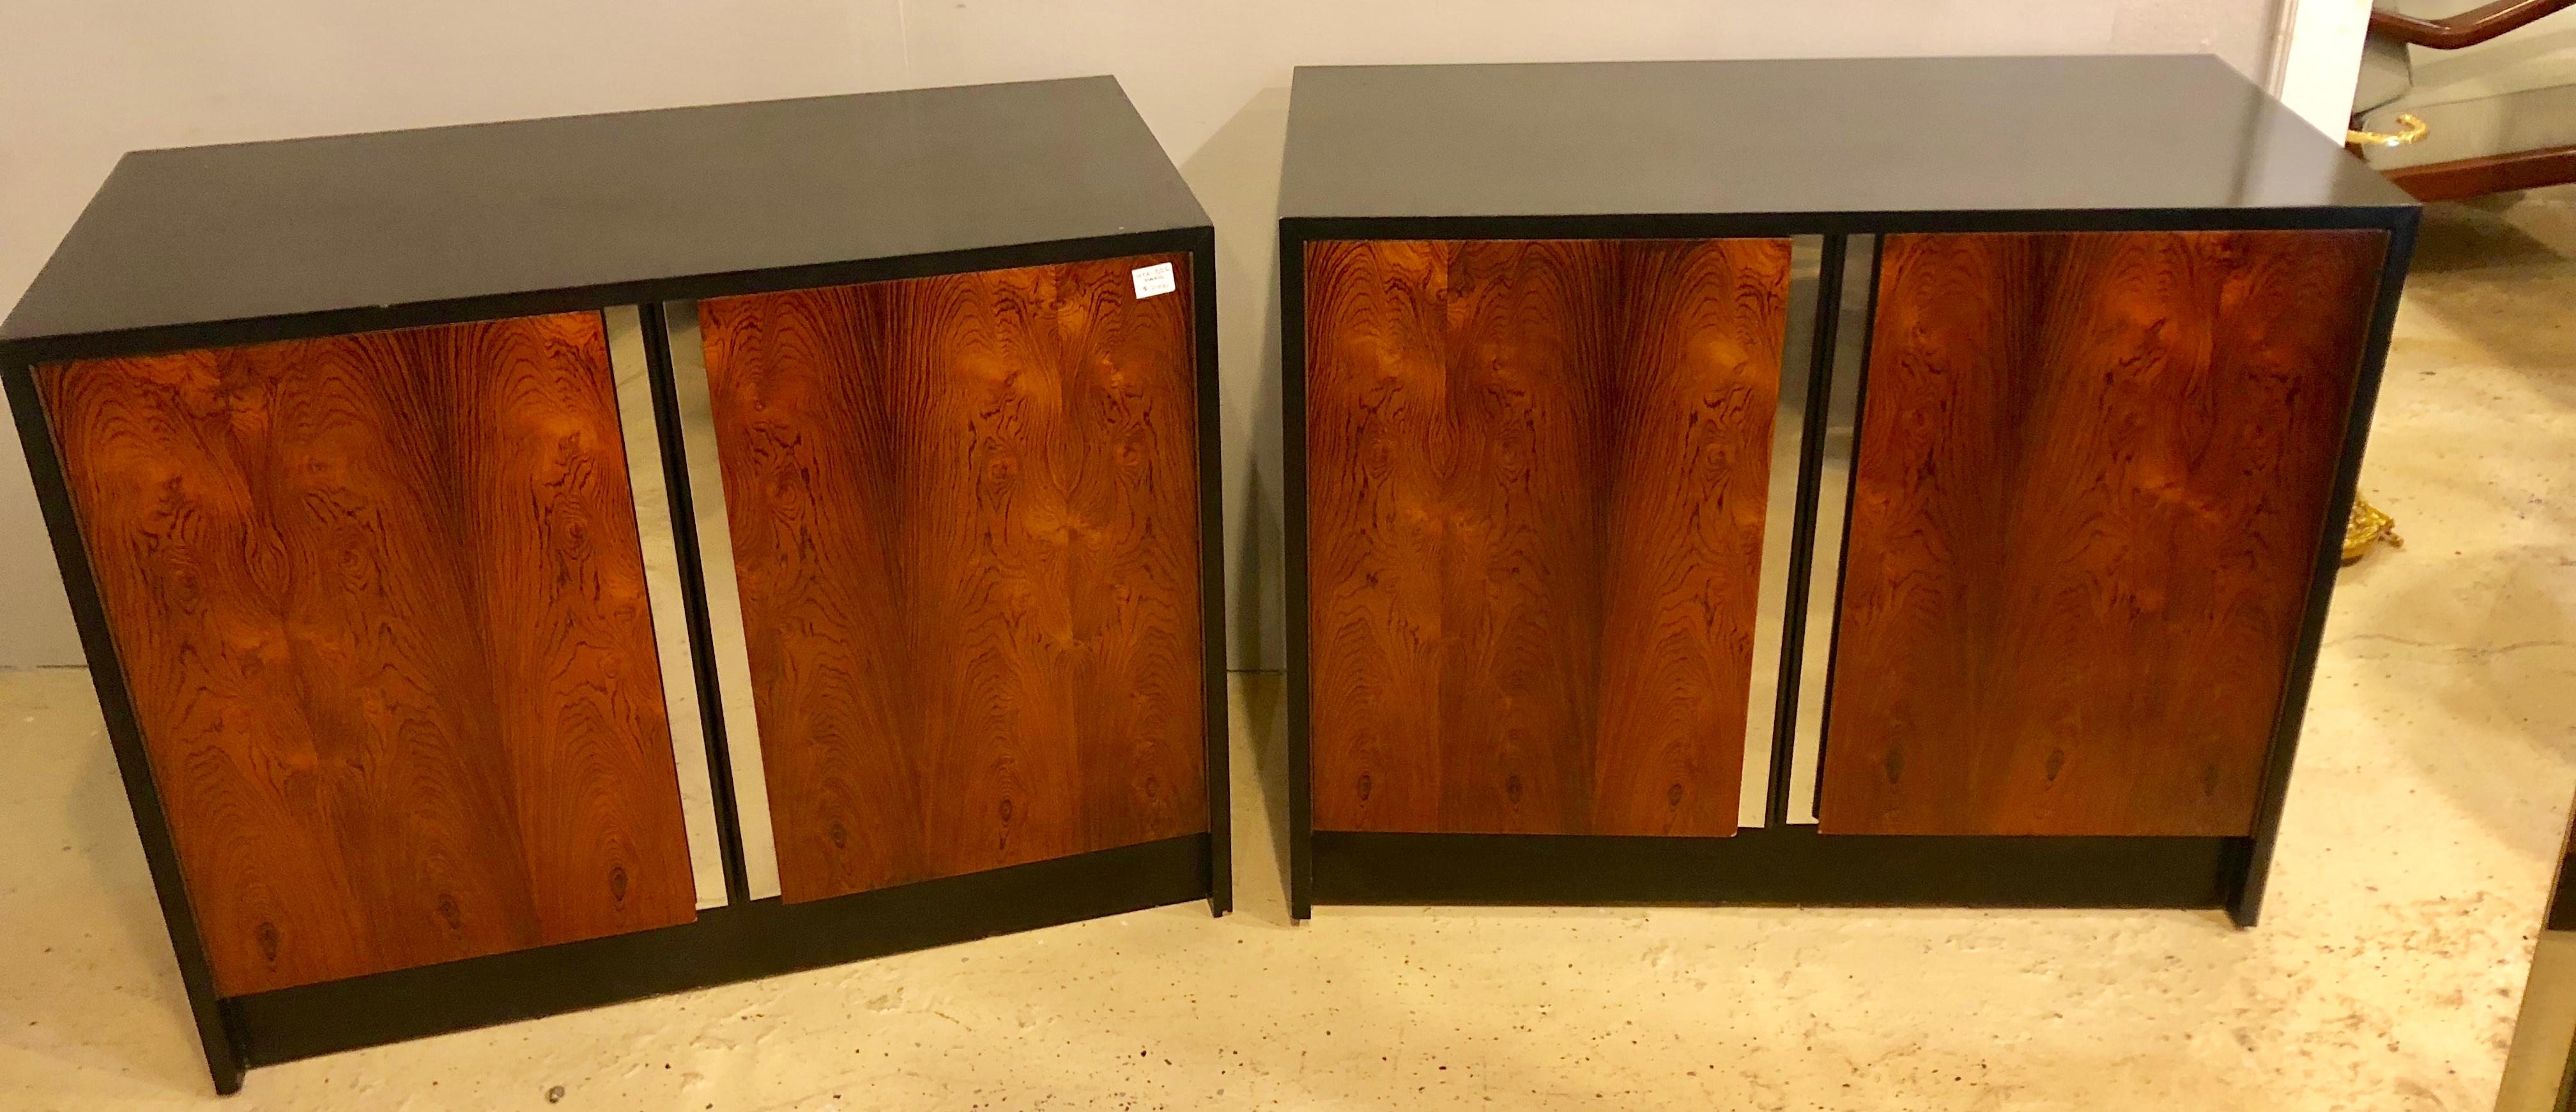 Pair of ebony and rosewood commodes or nightstands with chrome trim and that special Milo Baughman look. This pair of finely polished rosewood cabinets, nightstand or commodes in the Milo Baughman style are certain to draw attention. The pair having